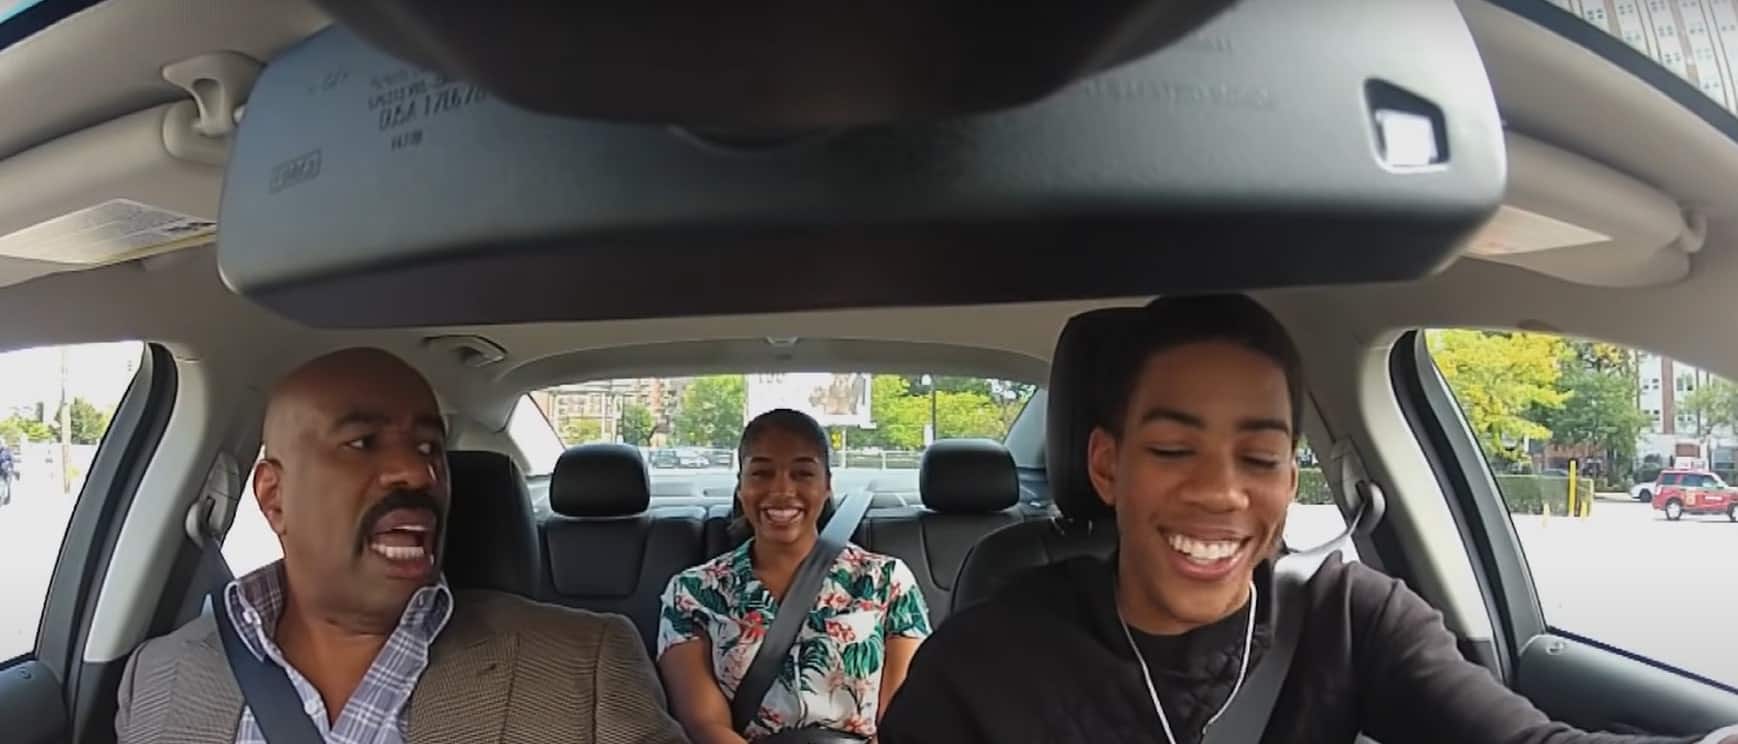 Image of Wynton Harvey with his sister and father, Steve Harvey in a car